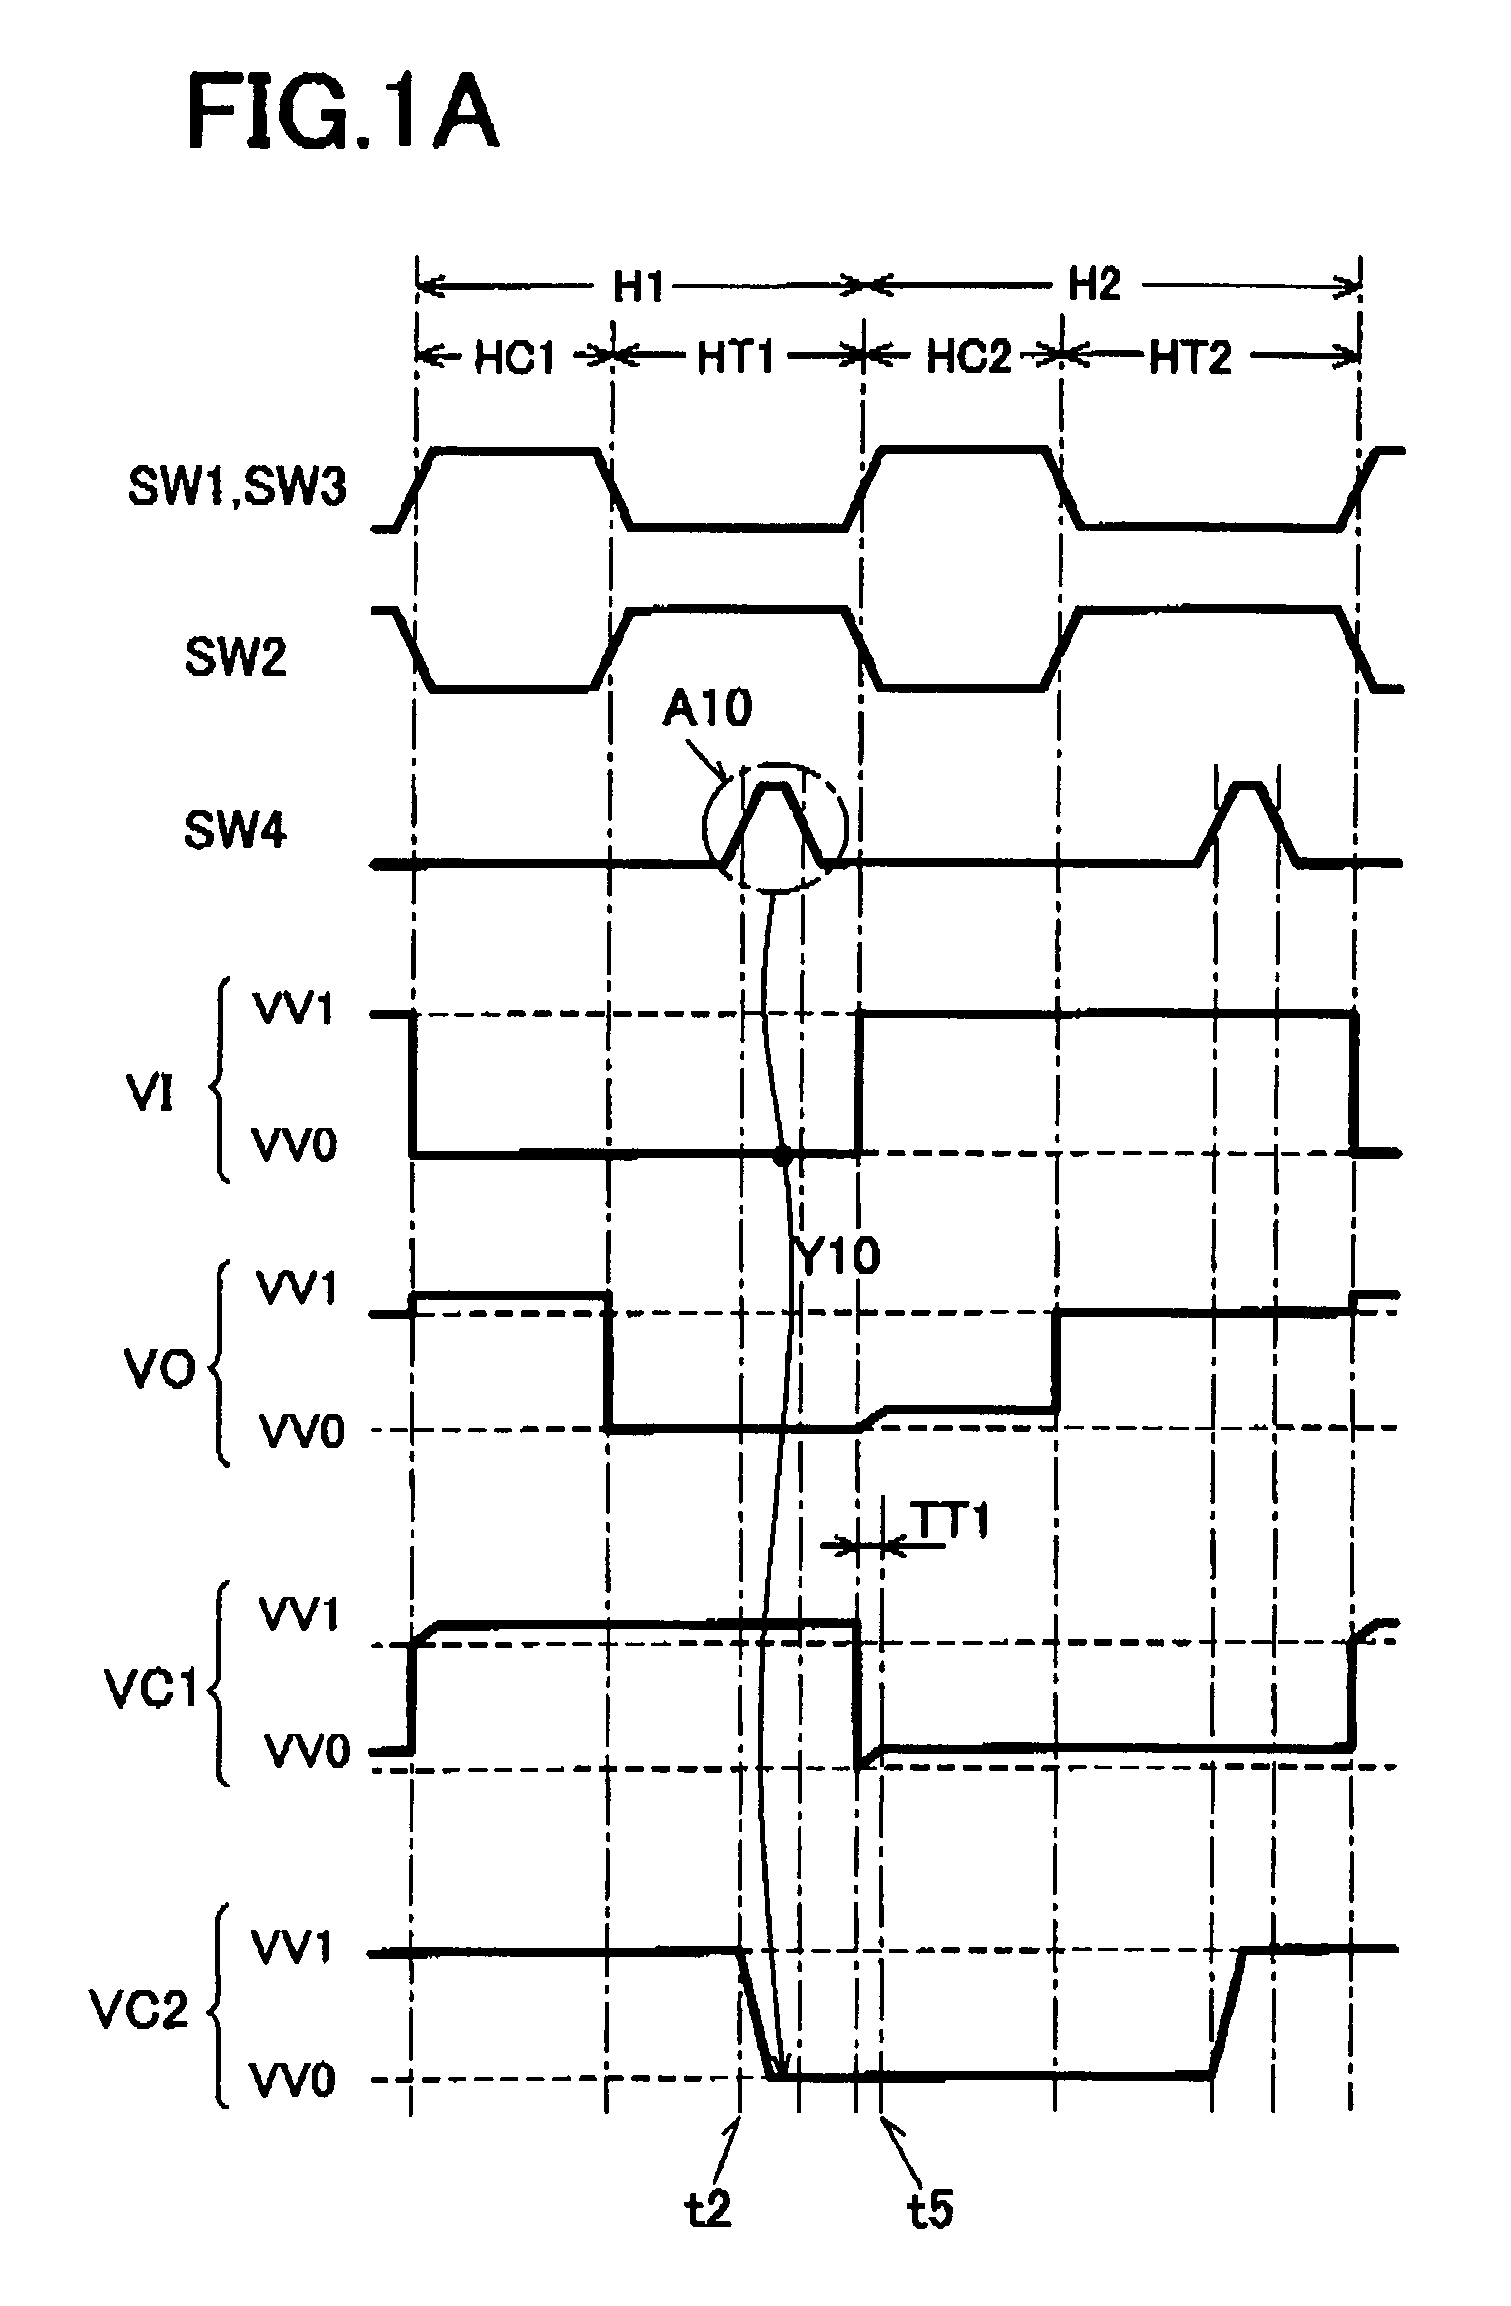 Operational amplifier, line driver, and liquid crystal display device